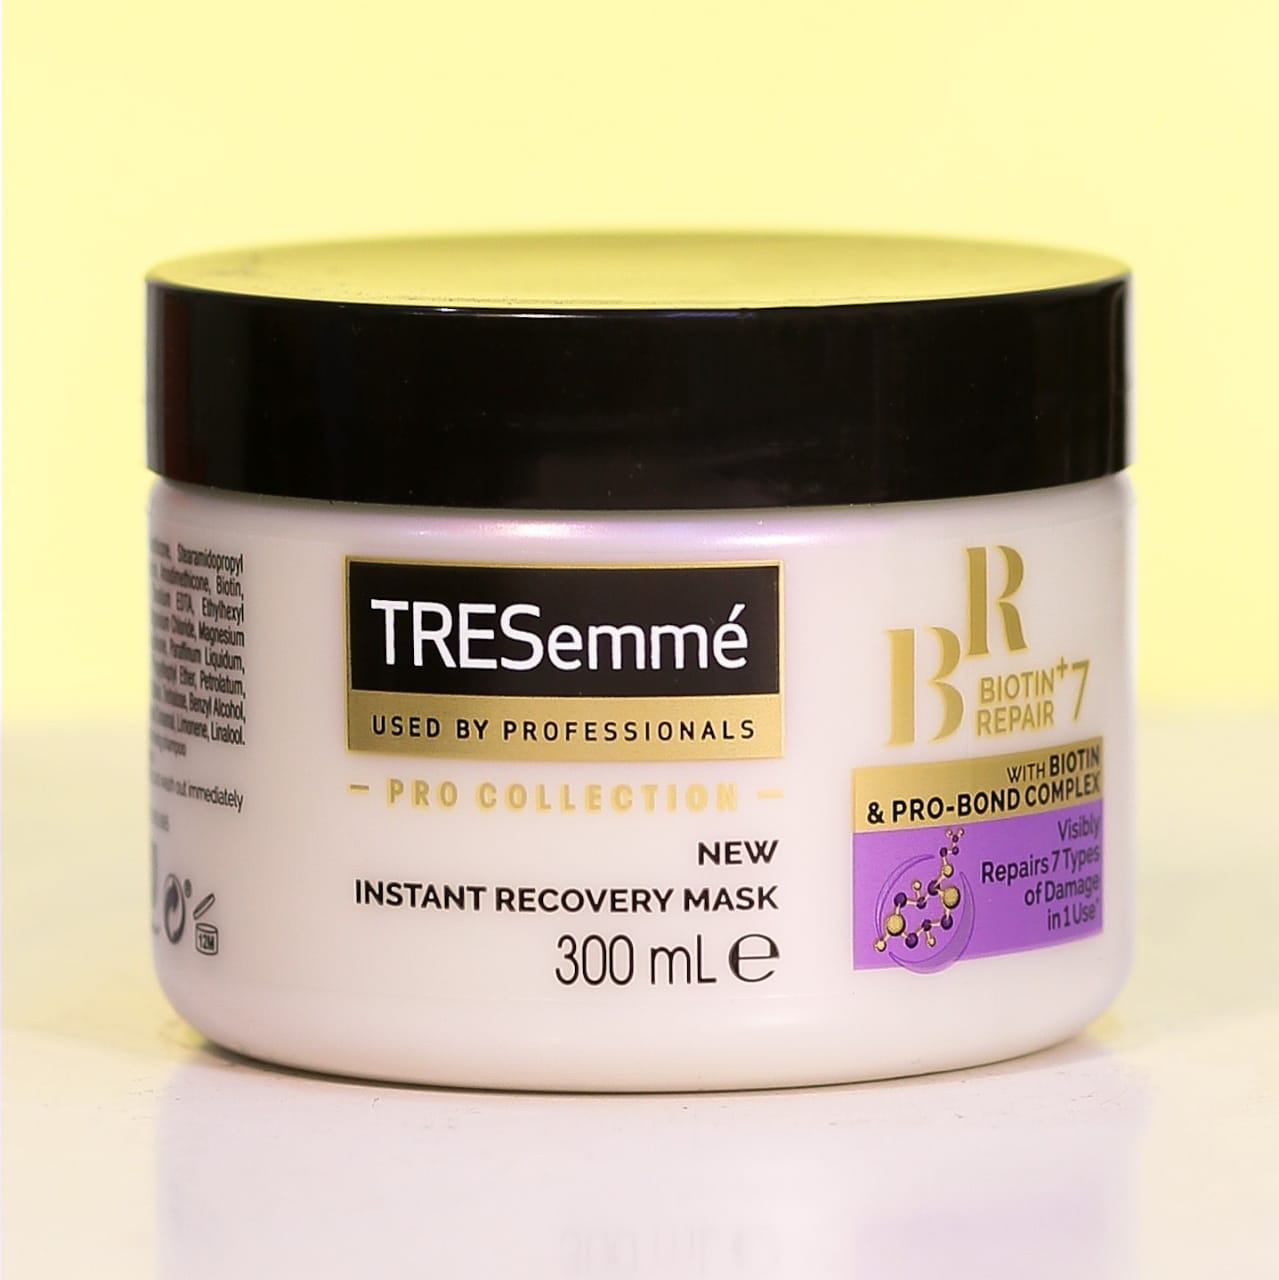 TRESEMME HAIR MASK INSTANT RECOVERY WITH BIOTIN 300 ML